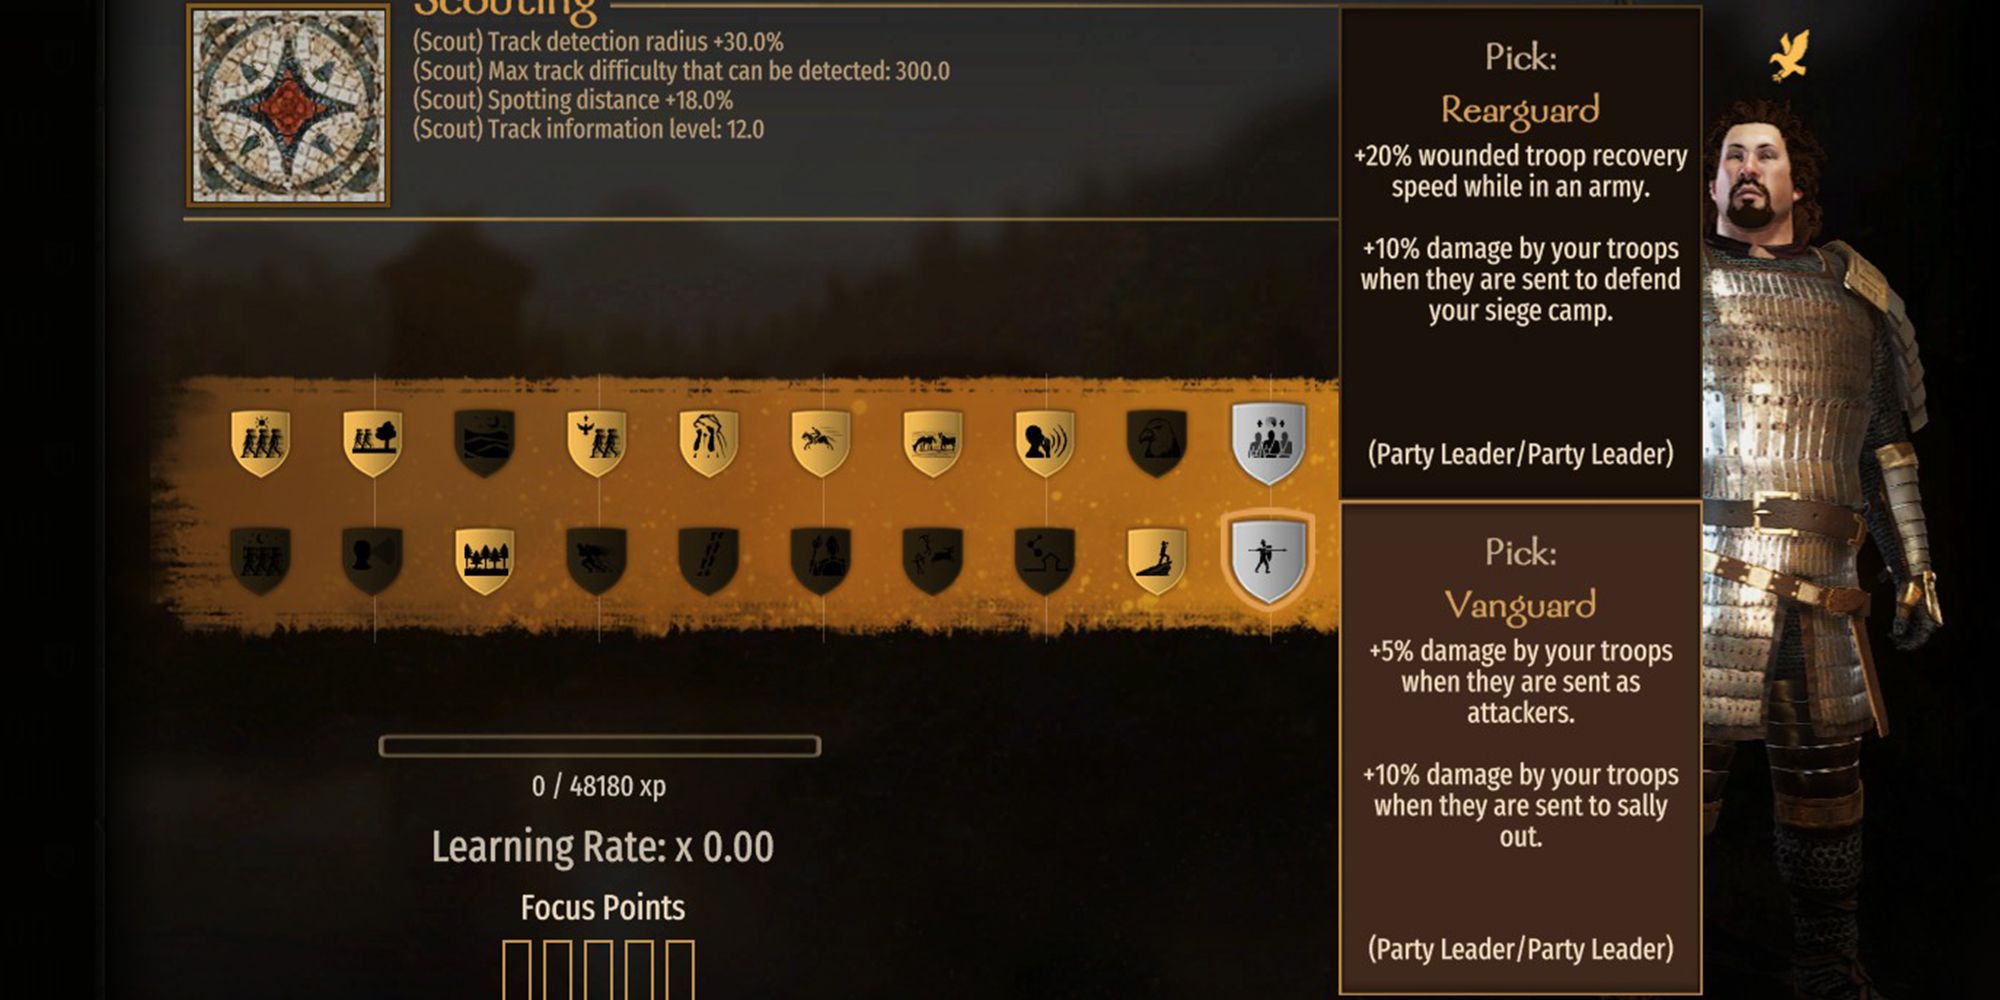 Mount & Blade 2: Bannerlord Vanguard Perk: +5% damage done by troops when they are sent as attackers. +10% more damage done by troops when they are deployed.